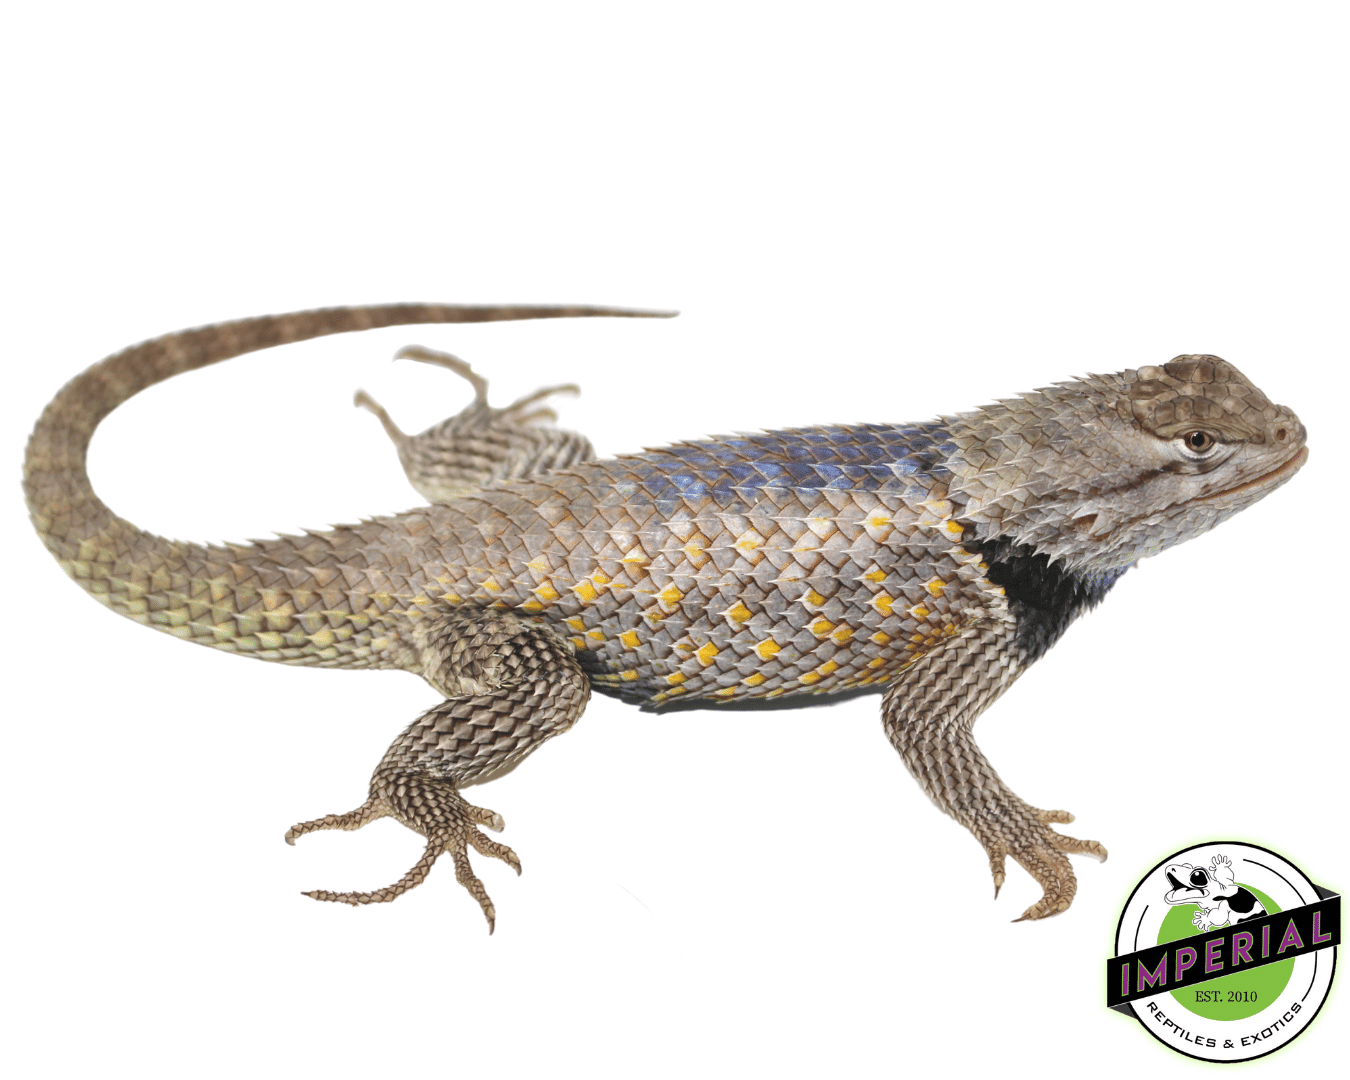 Texas Spiny Lizard for sale online at cheap prices, buy reptiles for sale near me